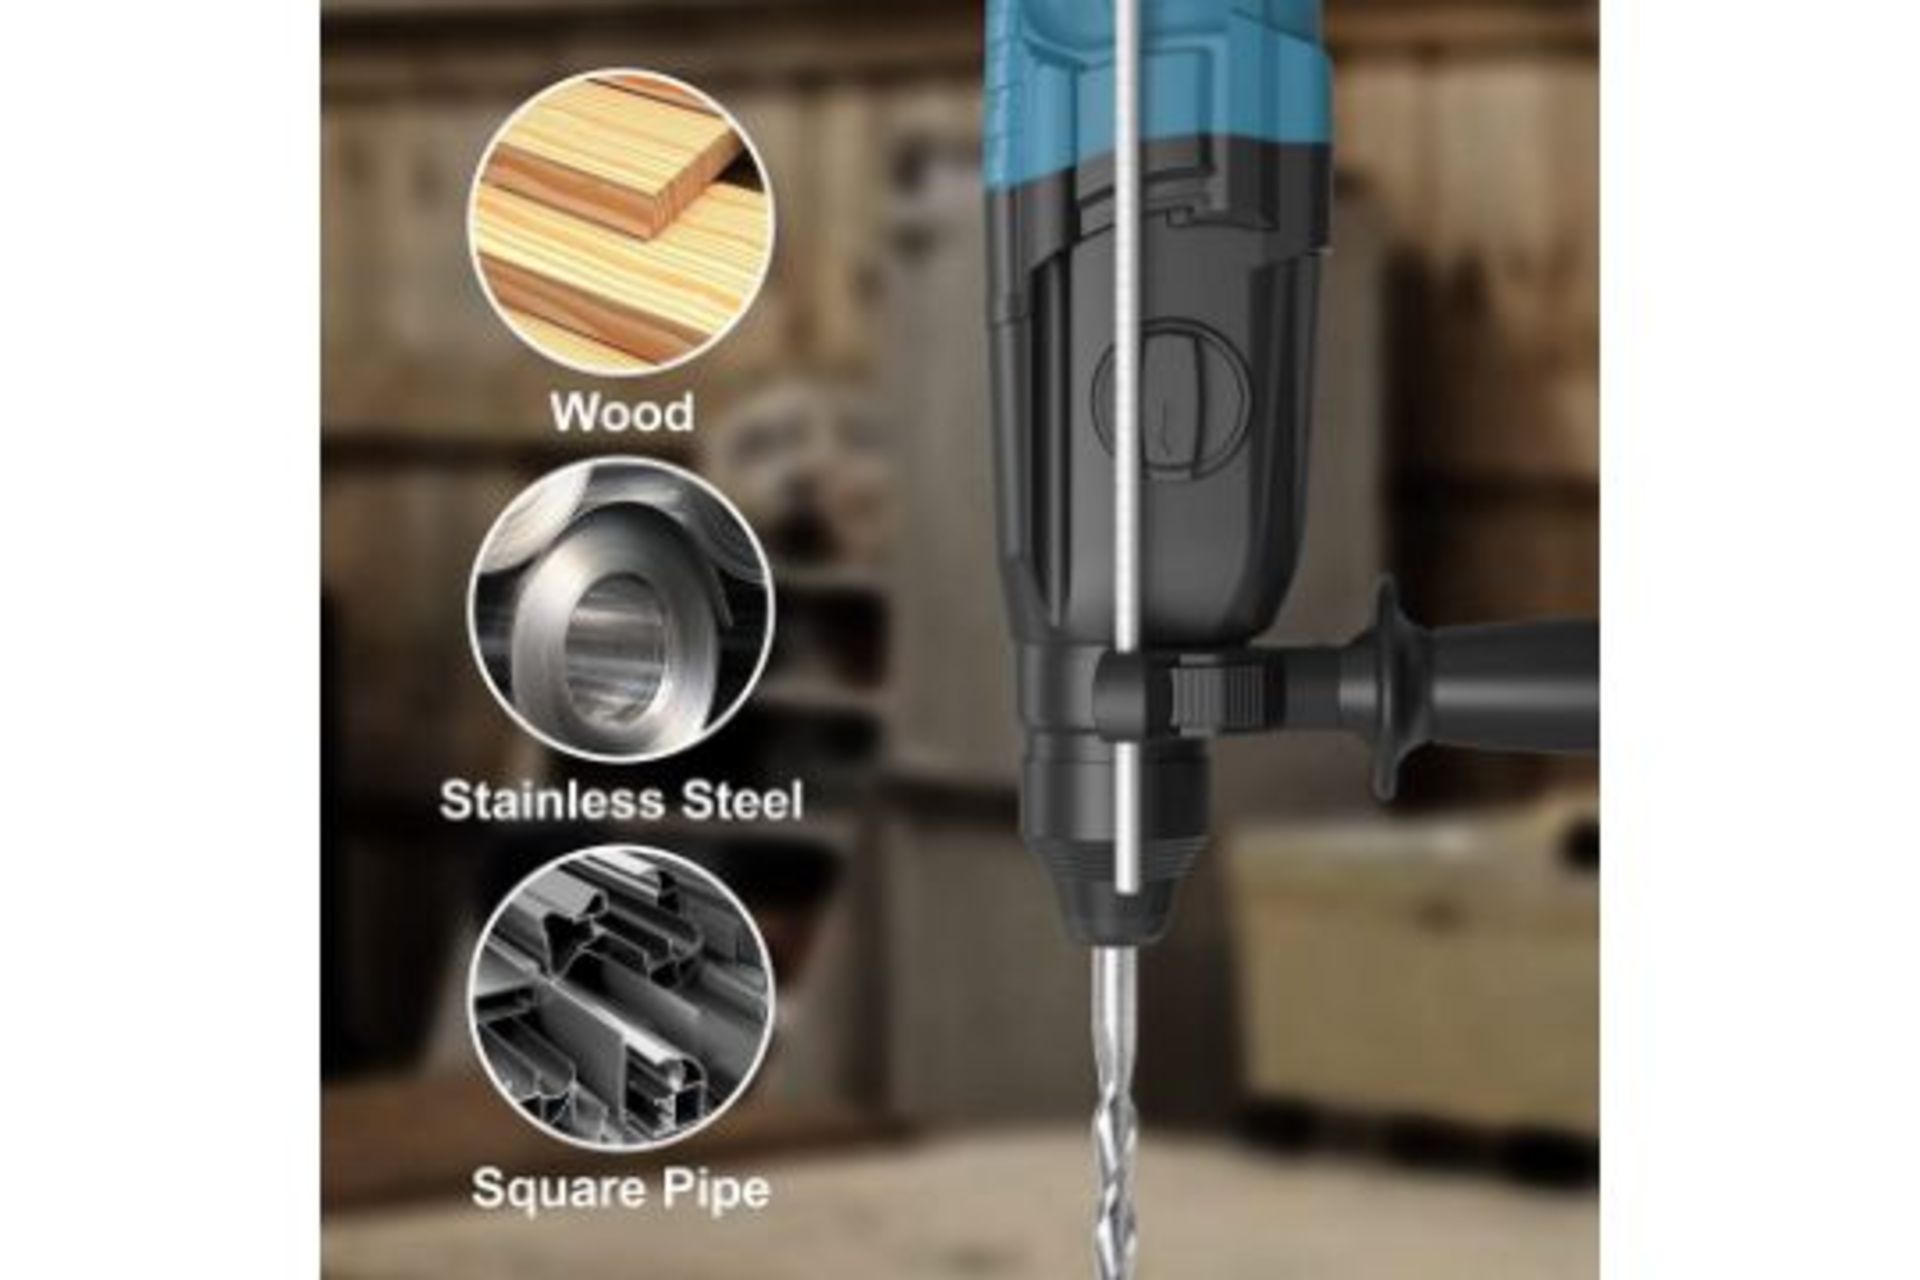 NEW BOXED WESCO 800W SDS Plus Rotary Hammer Drill, 3 Modes in 1, 2.8J Impact Energy, Variable-Speed, - Image 2 of 2